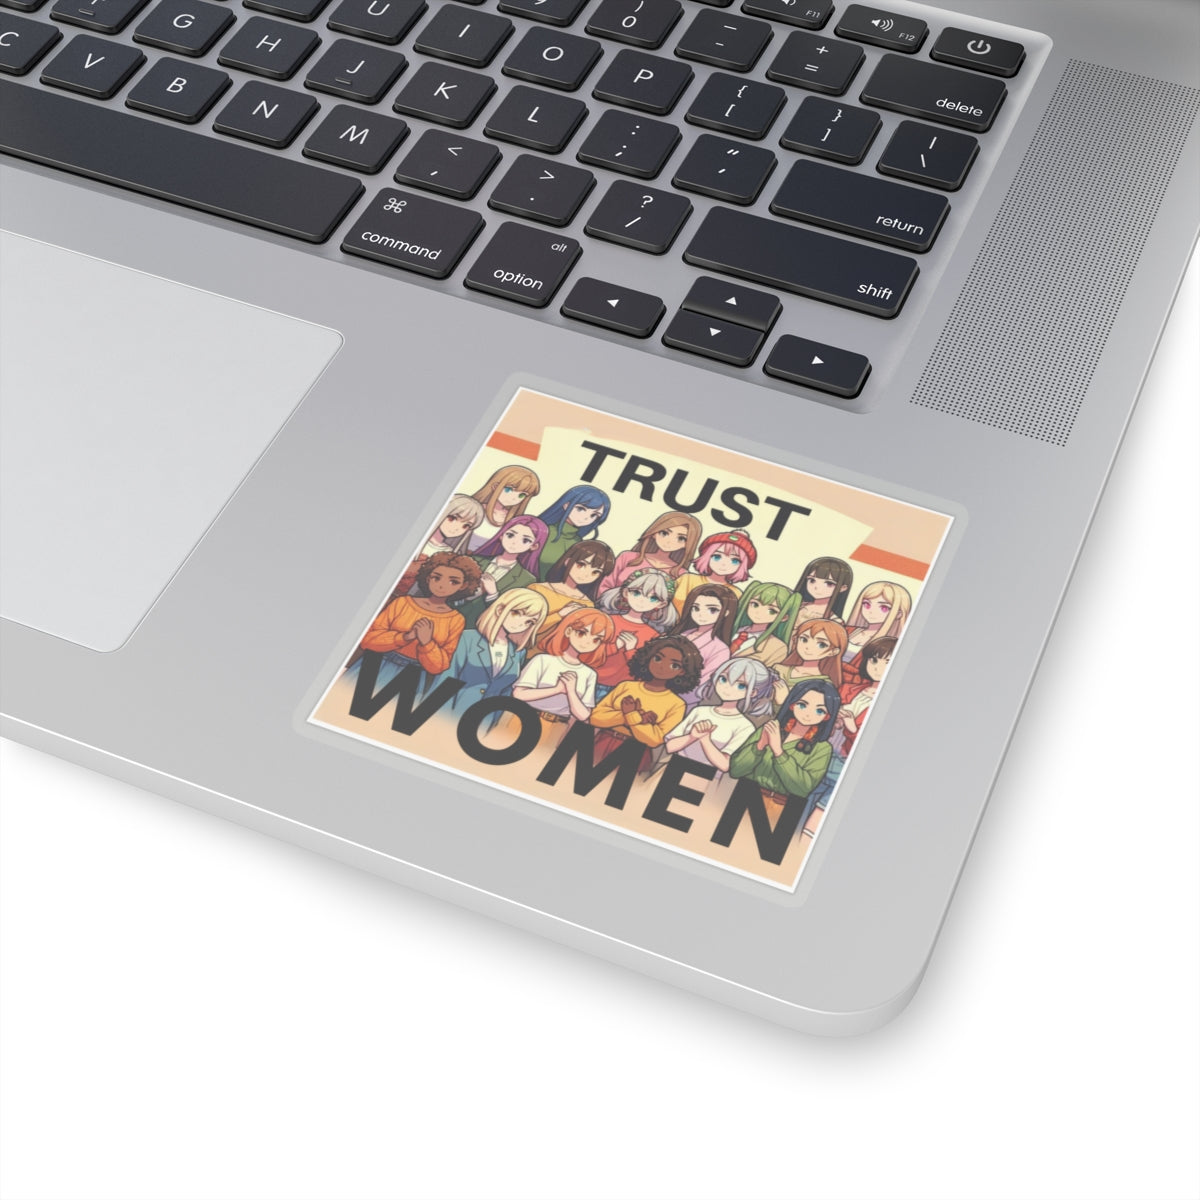 Trust Women! Say it Loud and say it Proud! Statement Sticker